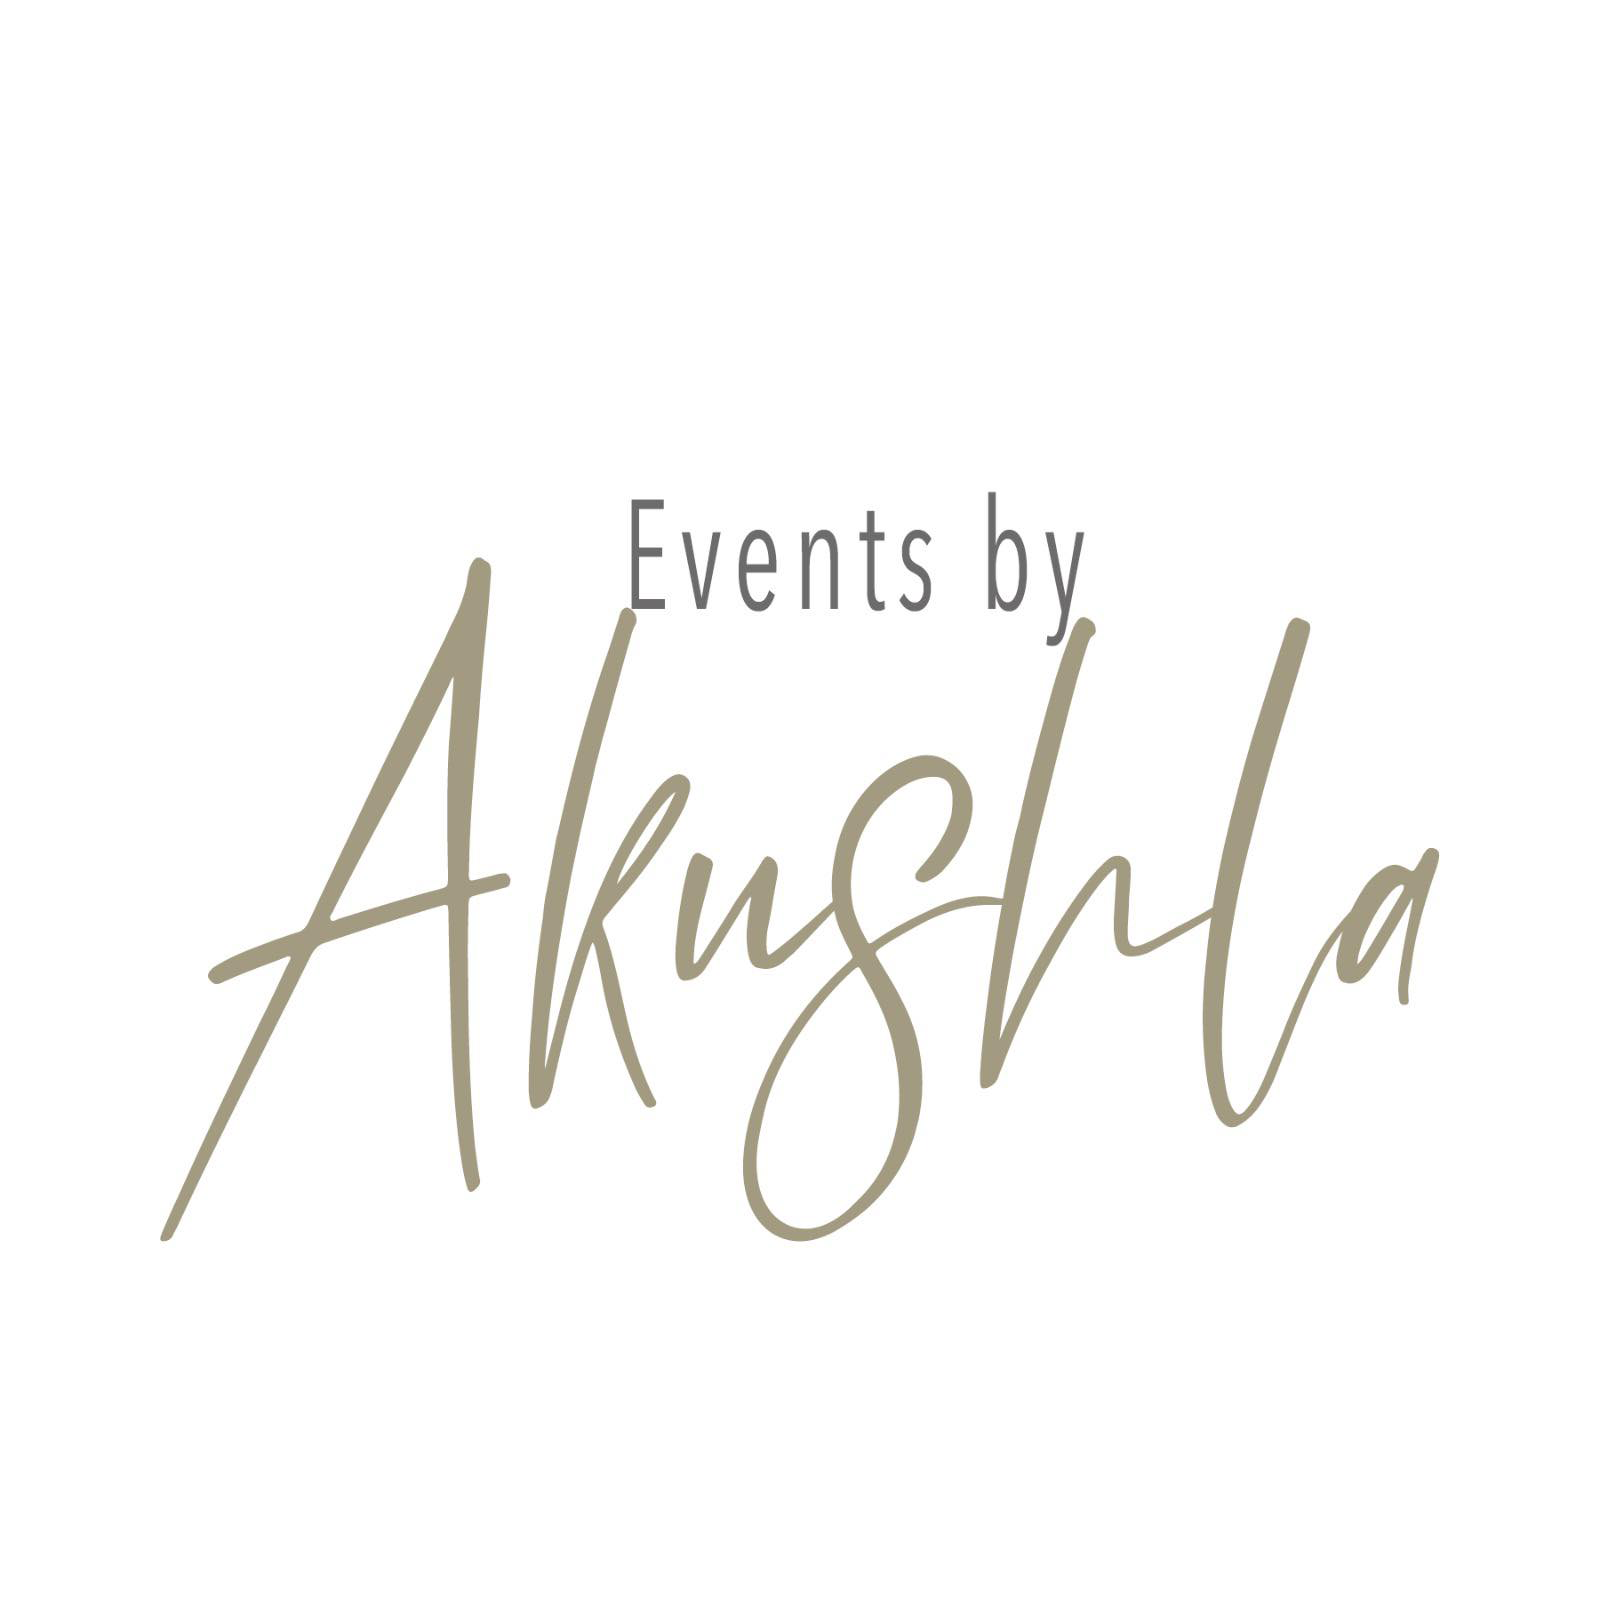 Events by Akushla